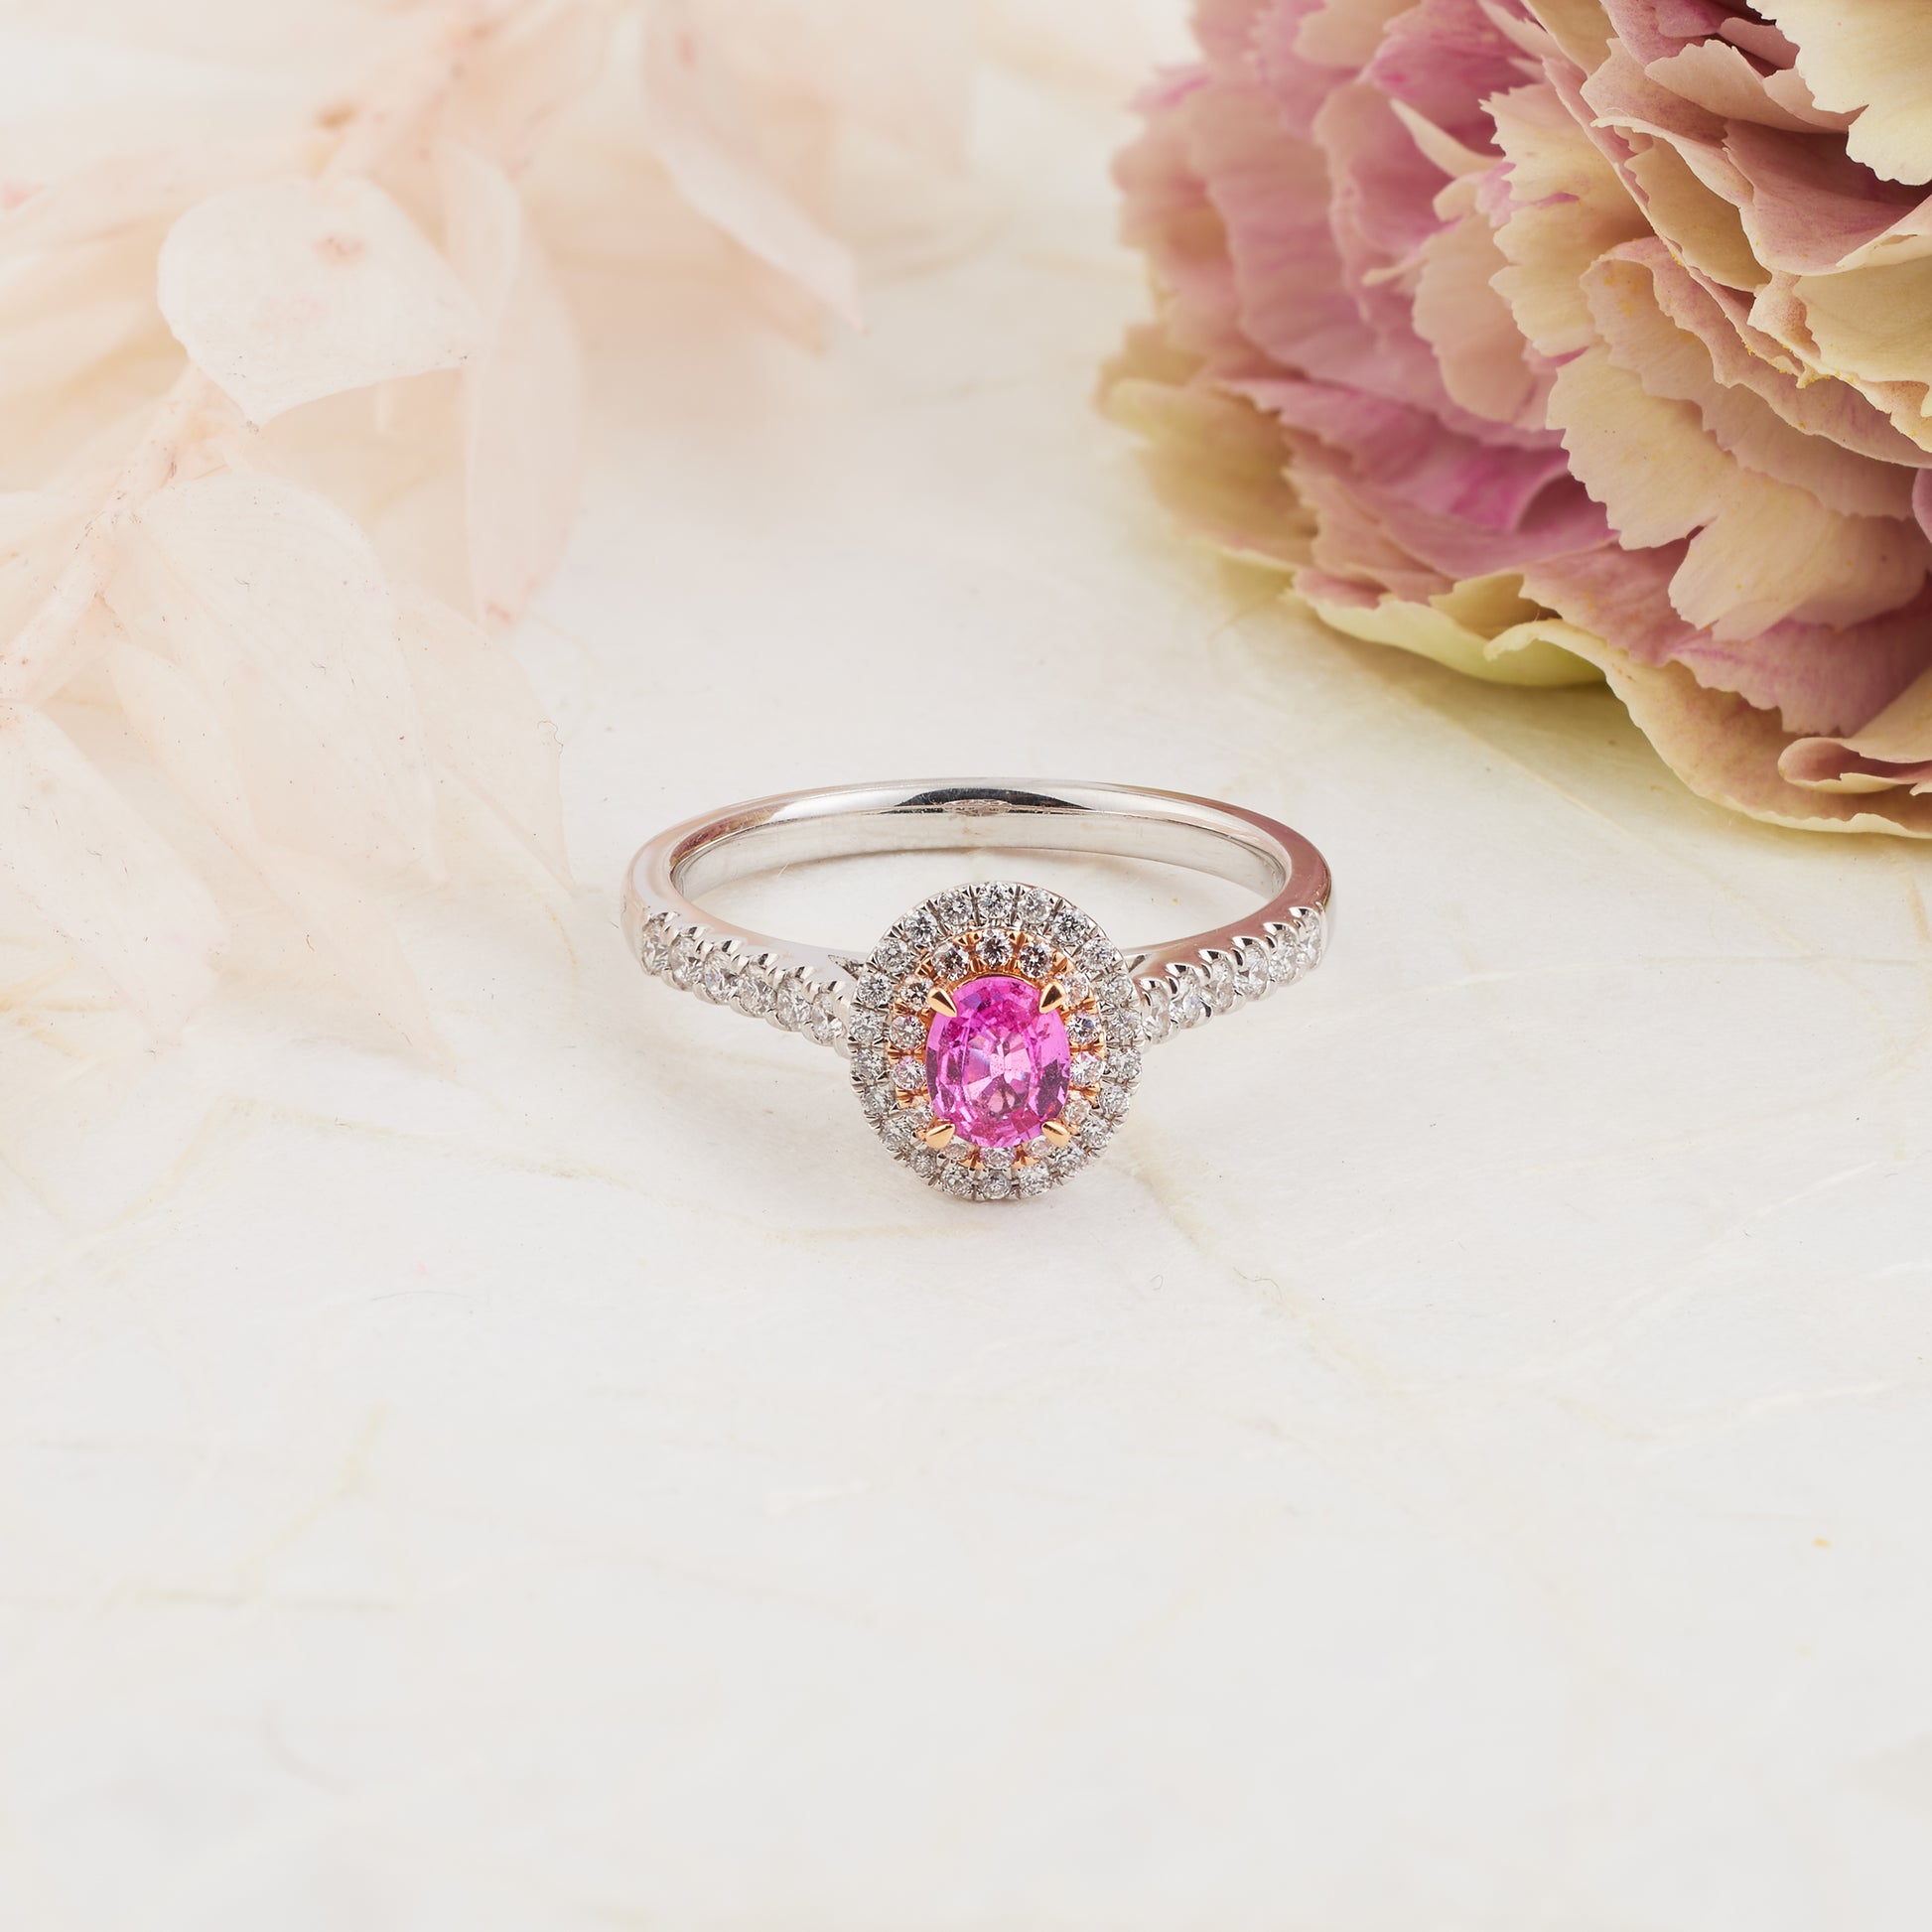 ROSE GOLD FASHION RING WITH OVAL PINK SAPPHIRE AND ROUND DIAMONDS